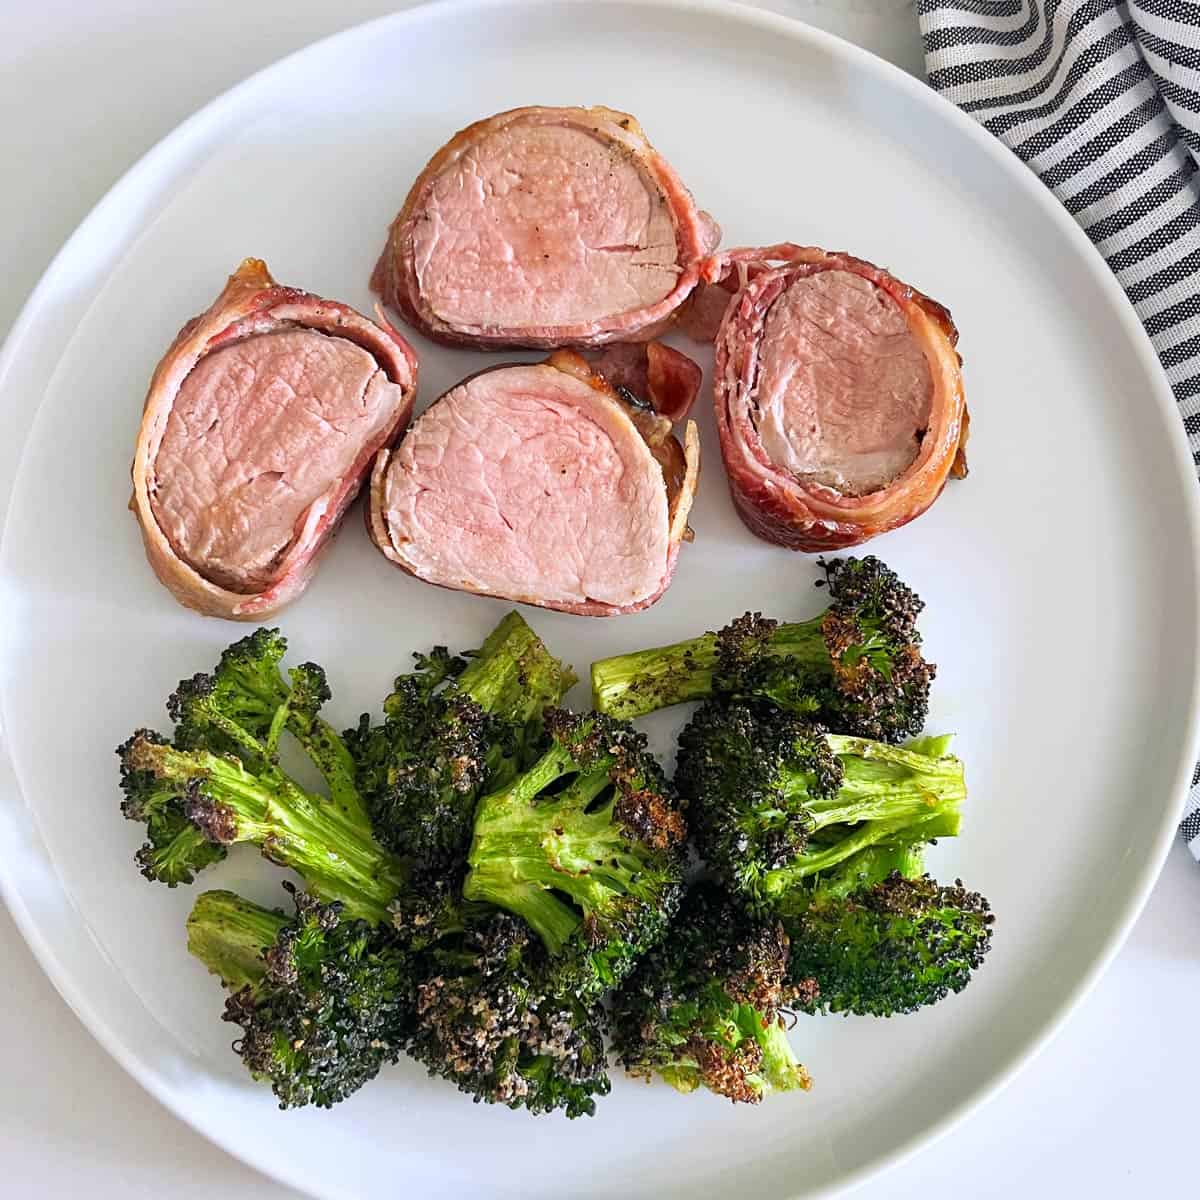 Bacon-wrapped pork tenderloin is served with roasted broccoli.